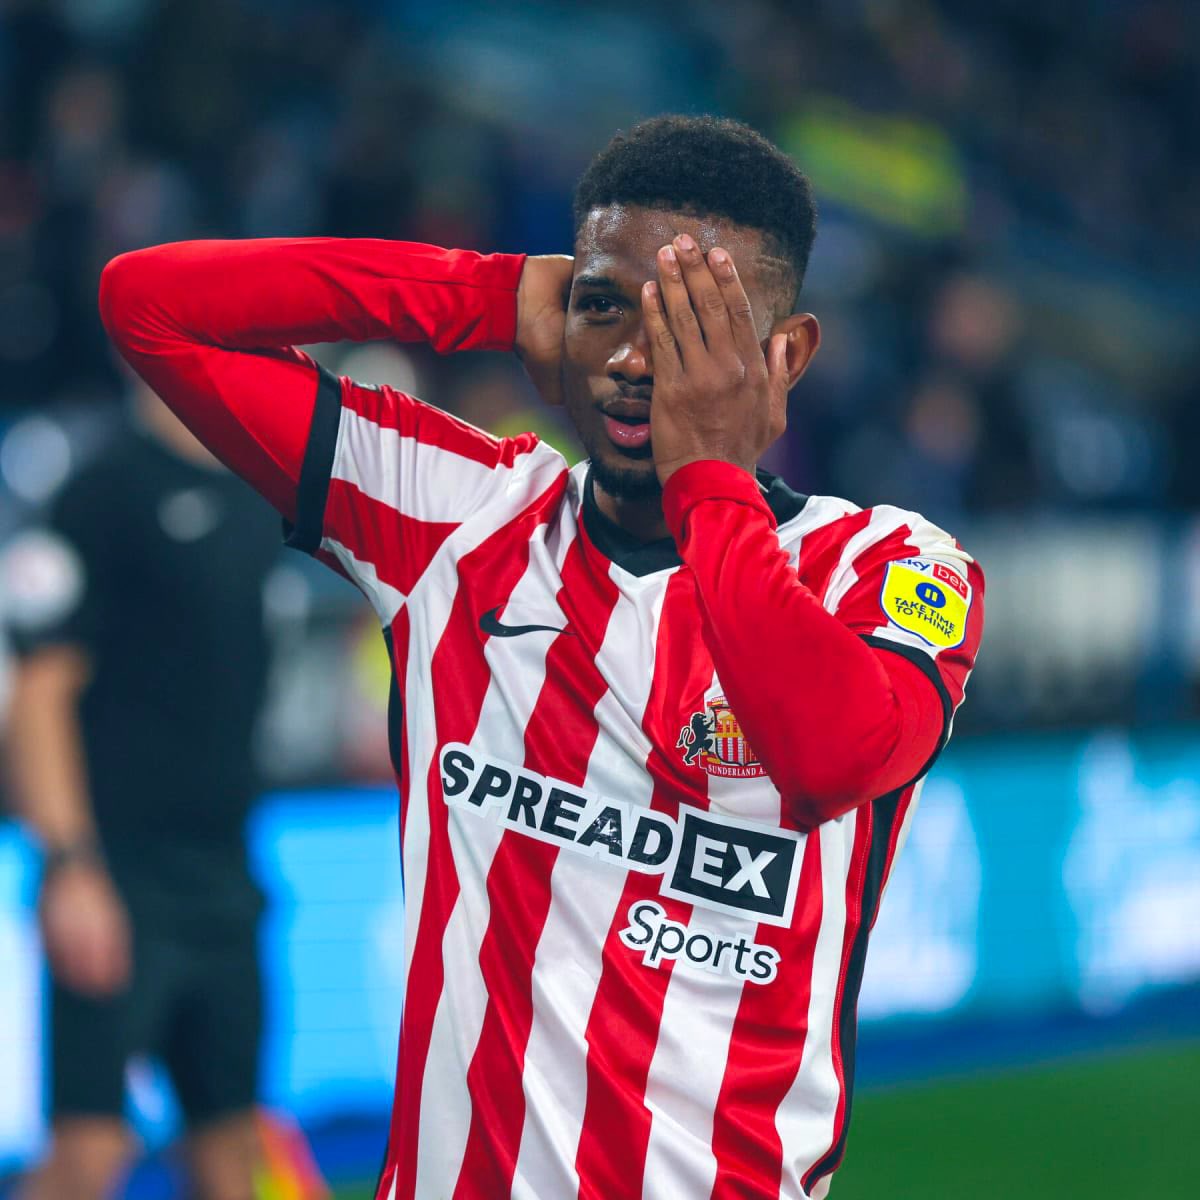 Amad Diallo scores again for Sunderland — he’s having an excellent season loan. 🔴✨ #MUFC

Amad really hopes to have a chance at Manchester United next season. He’s dreaming of Man Utd first team since long time — gonna give his best in the pre-season.